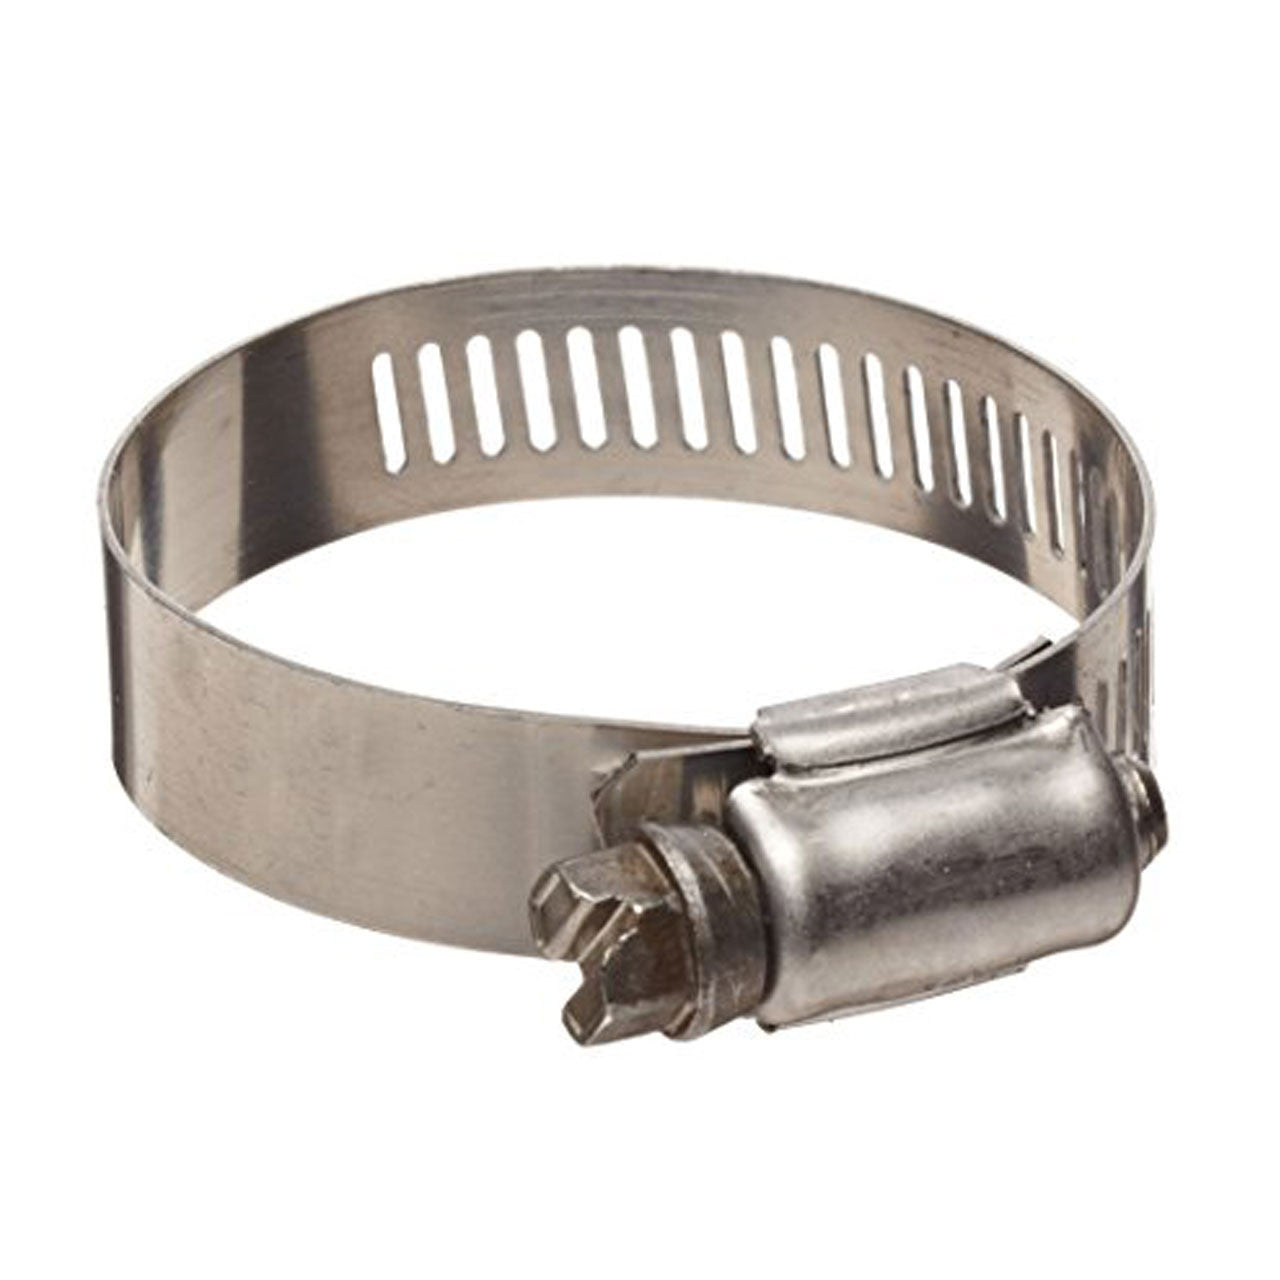 Stainless Steel Hose Clamp (10 per Bag)